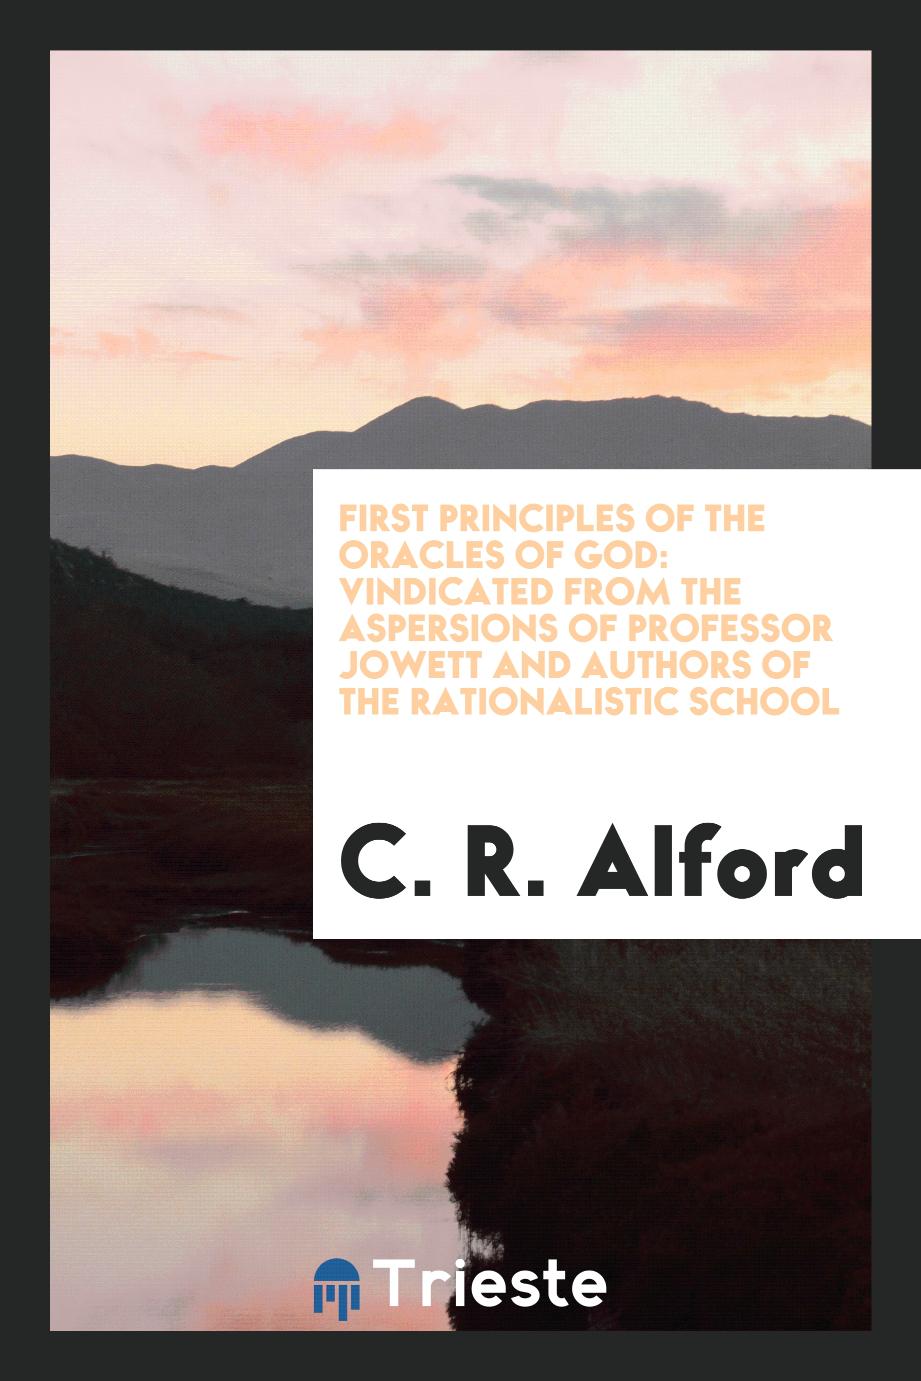 First Principles of the Oracles of God: Vindicated from the Aspersions of Professor Jowett and Authors of the Rationalistic School